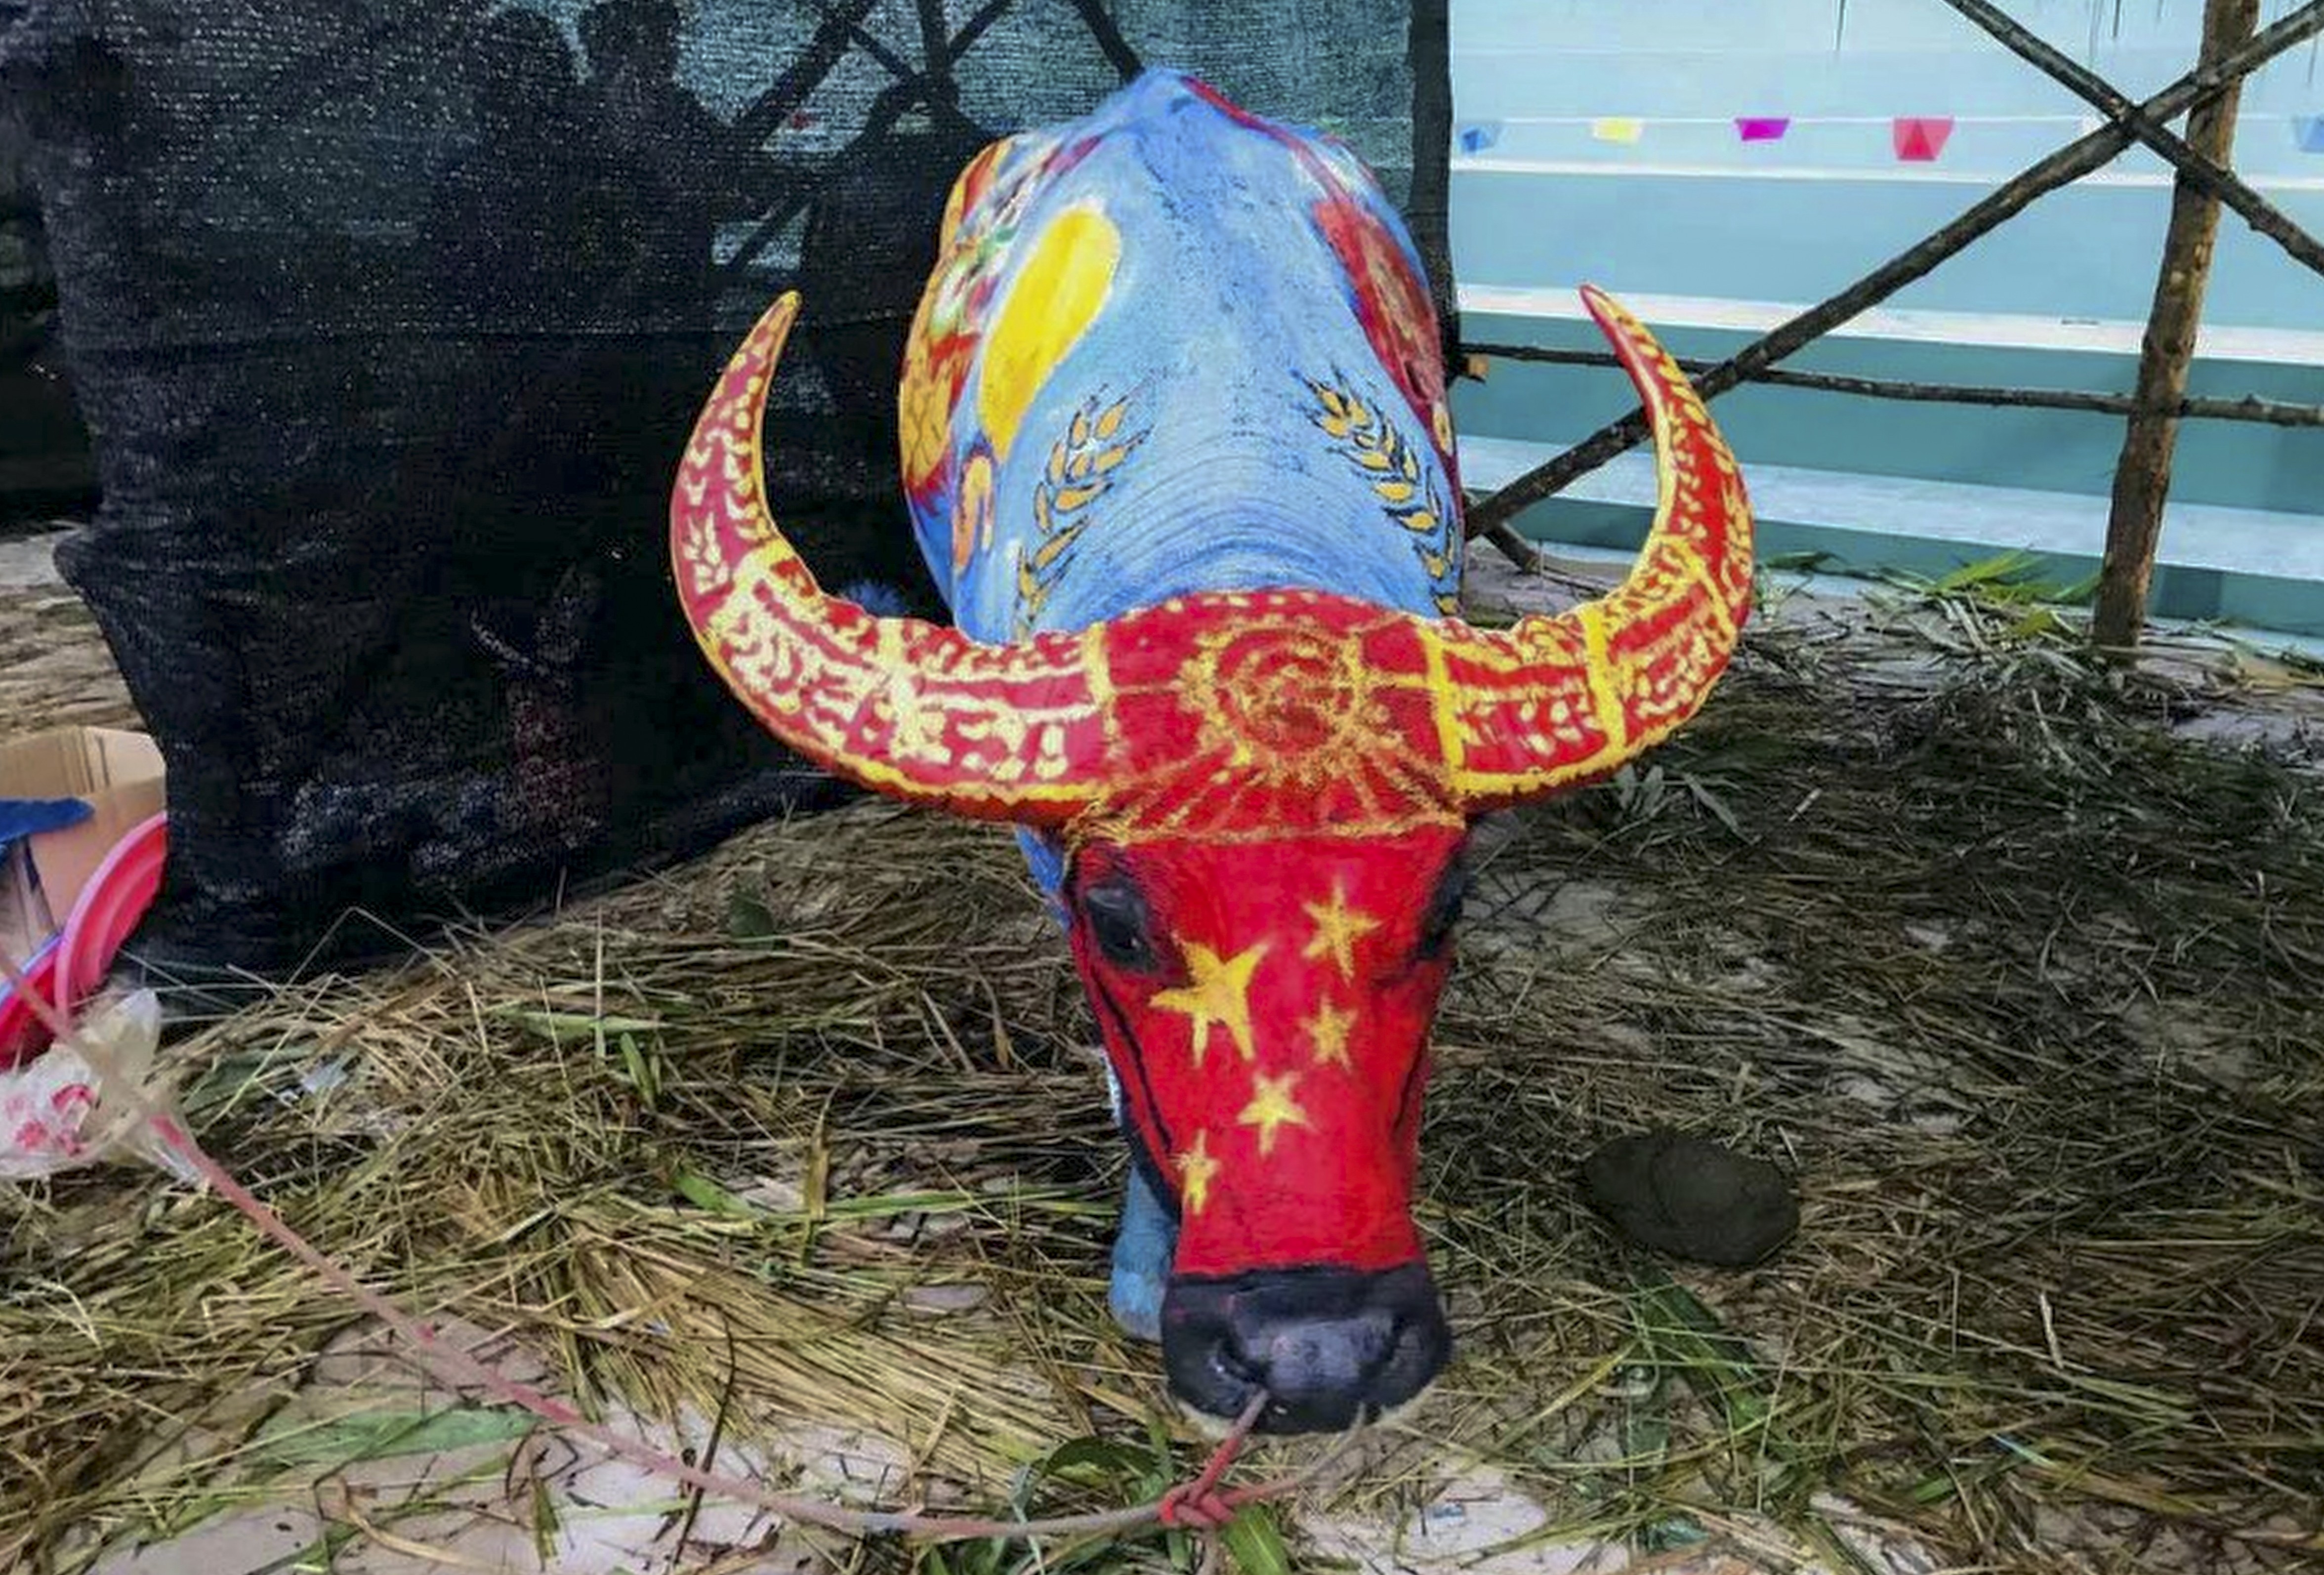 One of the buffaloes painted in the competition. Photo: Xinhua